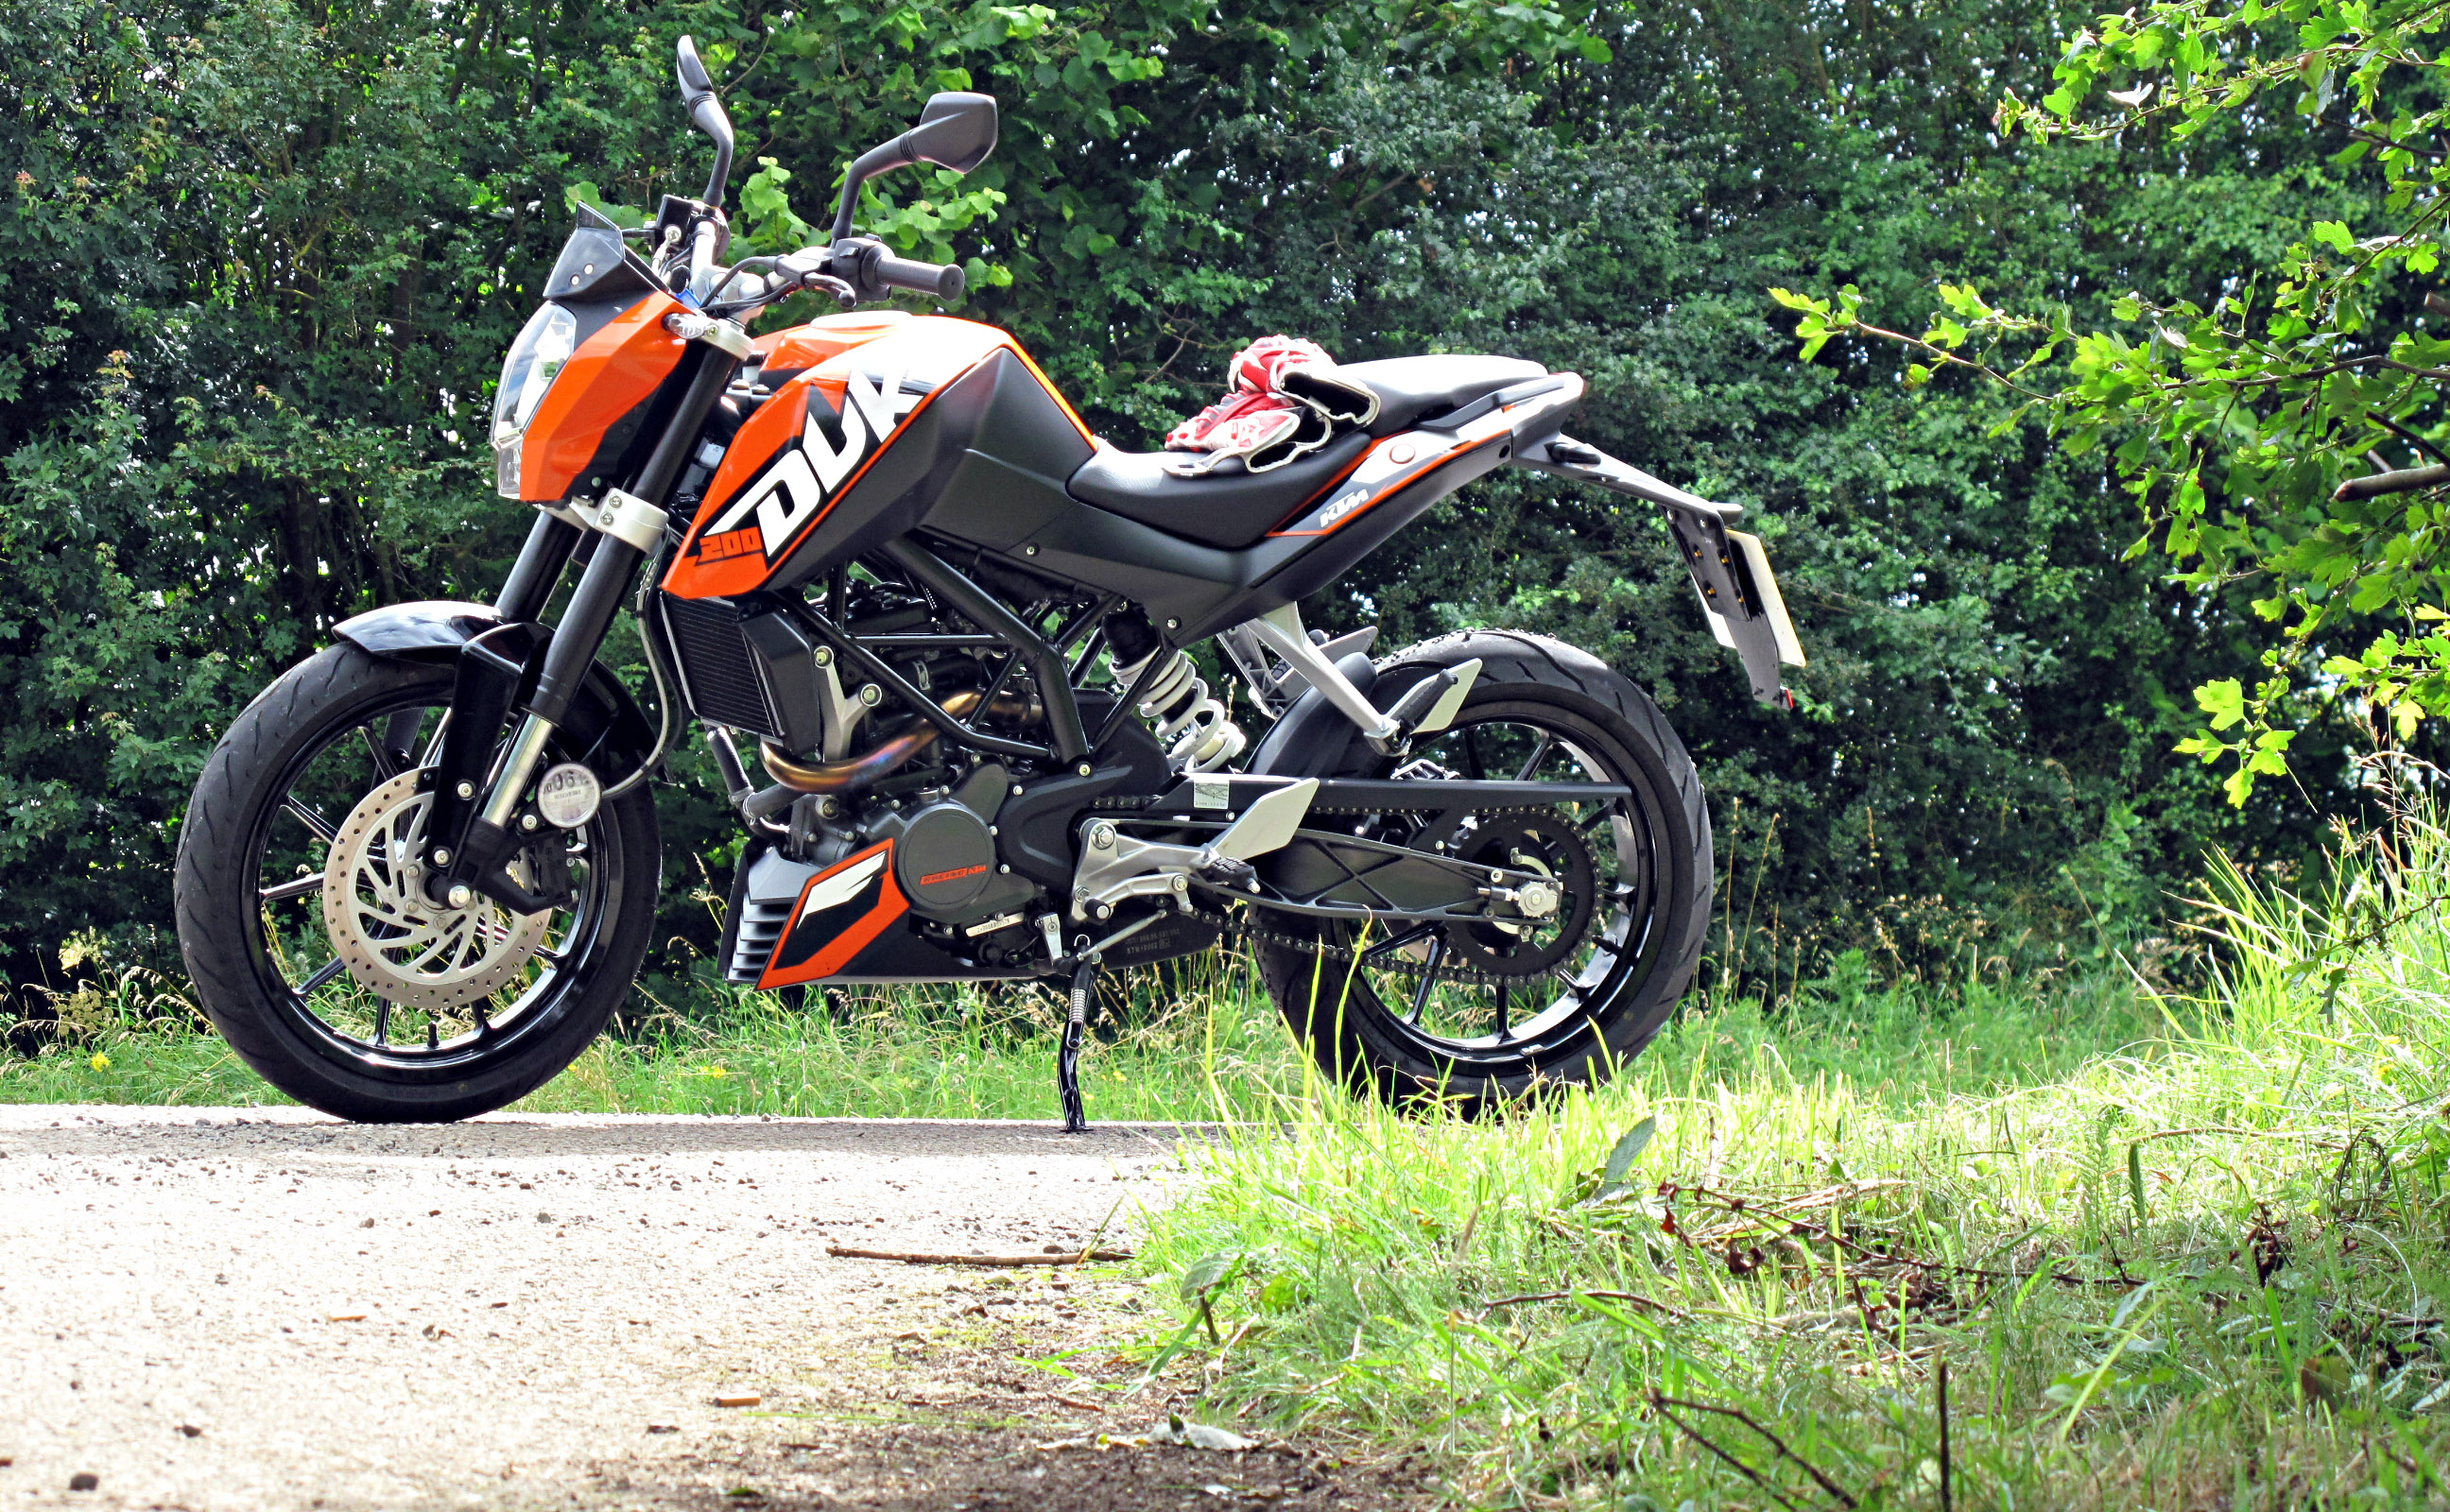 KTM India to launch 4 new bikes [RC200, RC390, 390 